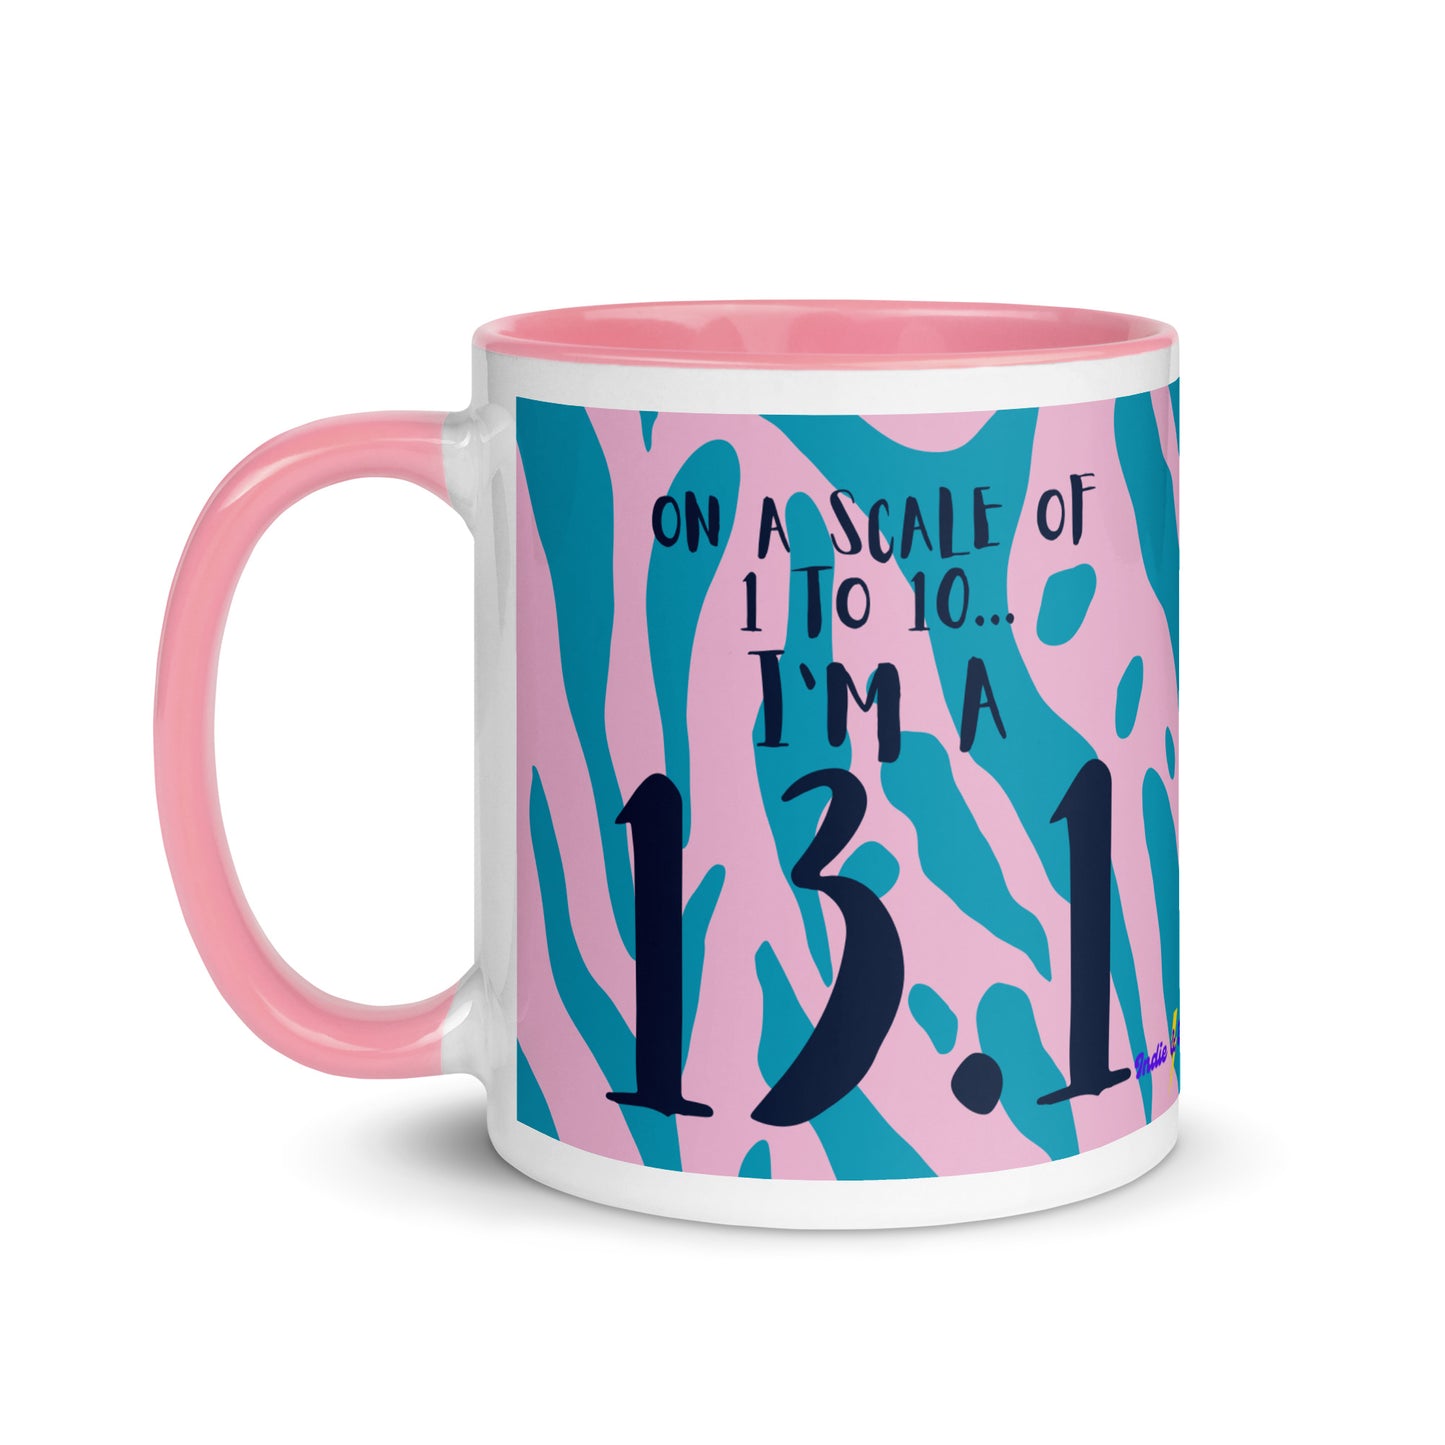 pink rimmed and handled mug with a pink and blue leopard print design and the words on a scale of 1 to 10 I'm a 13.1. A gift for half marathon runners